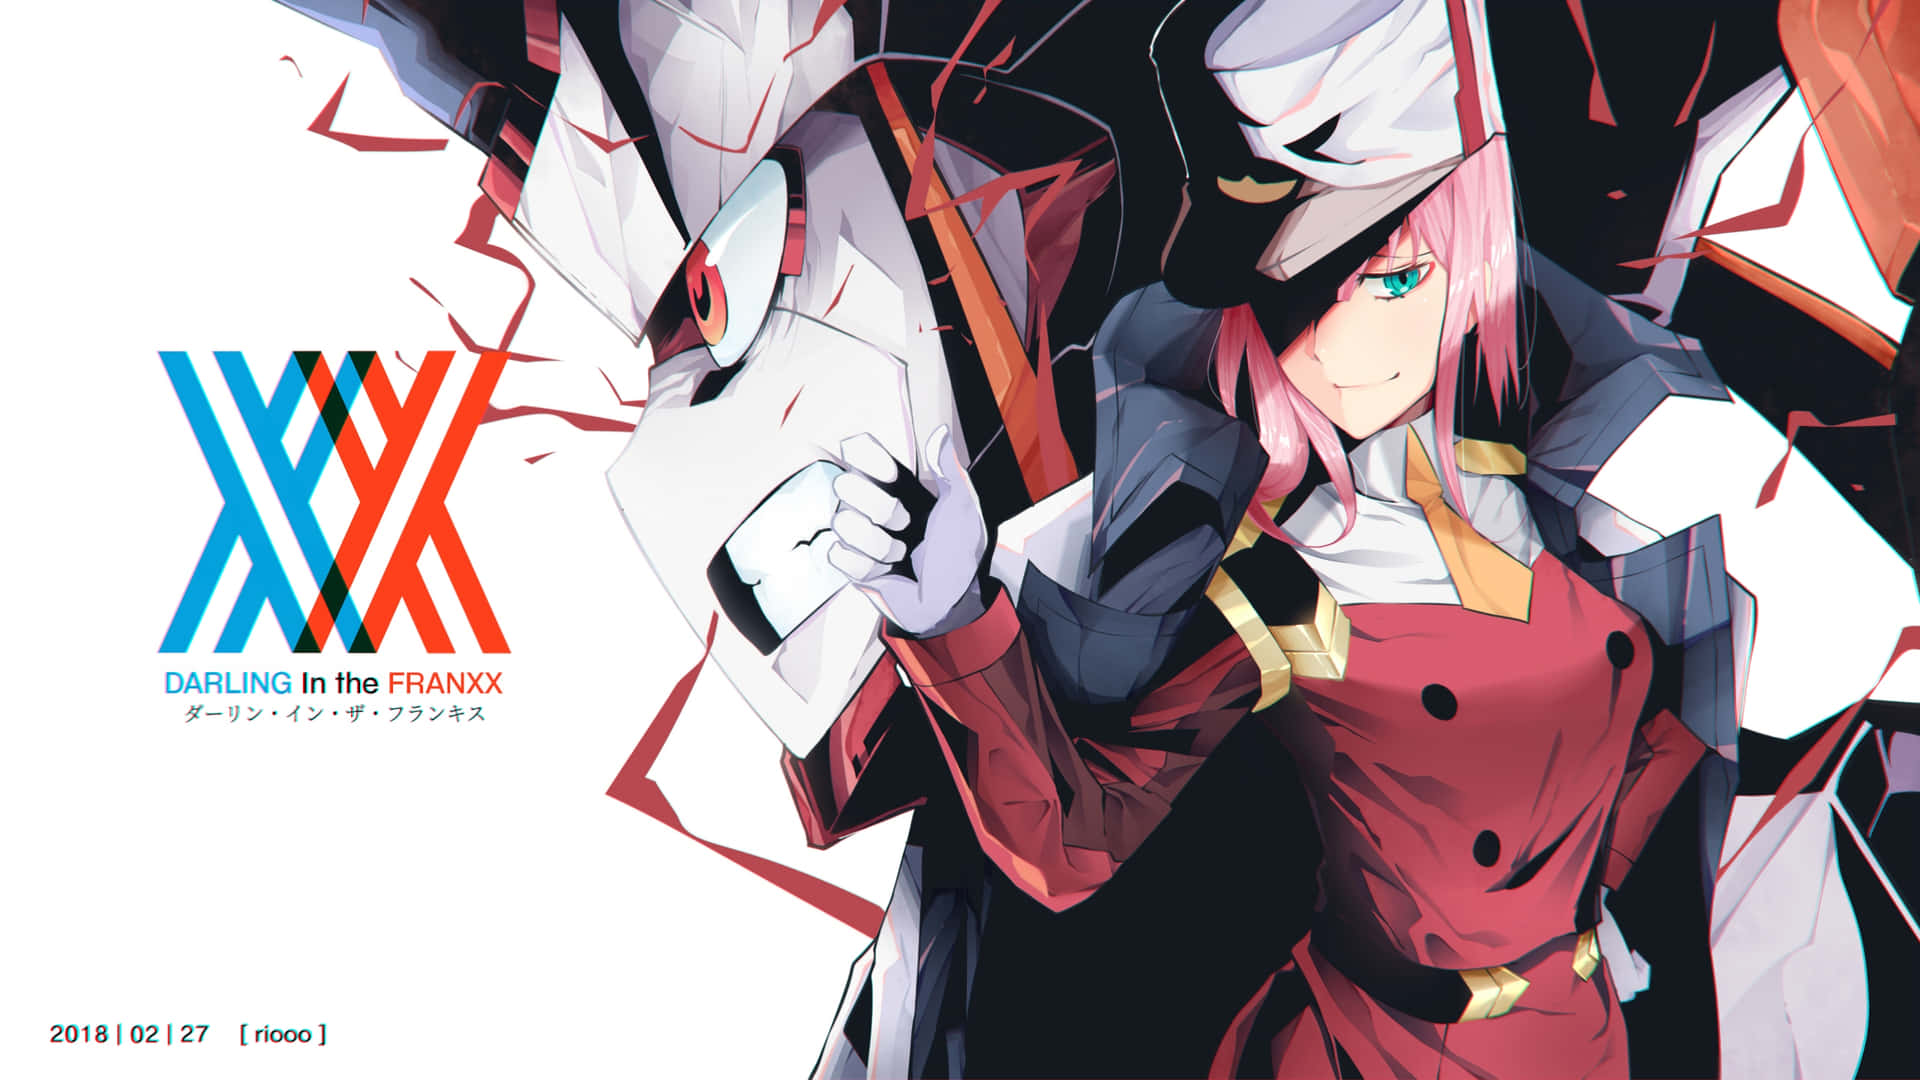 A glimpse into the thrilling world of Darling In The Franxx